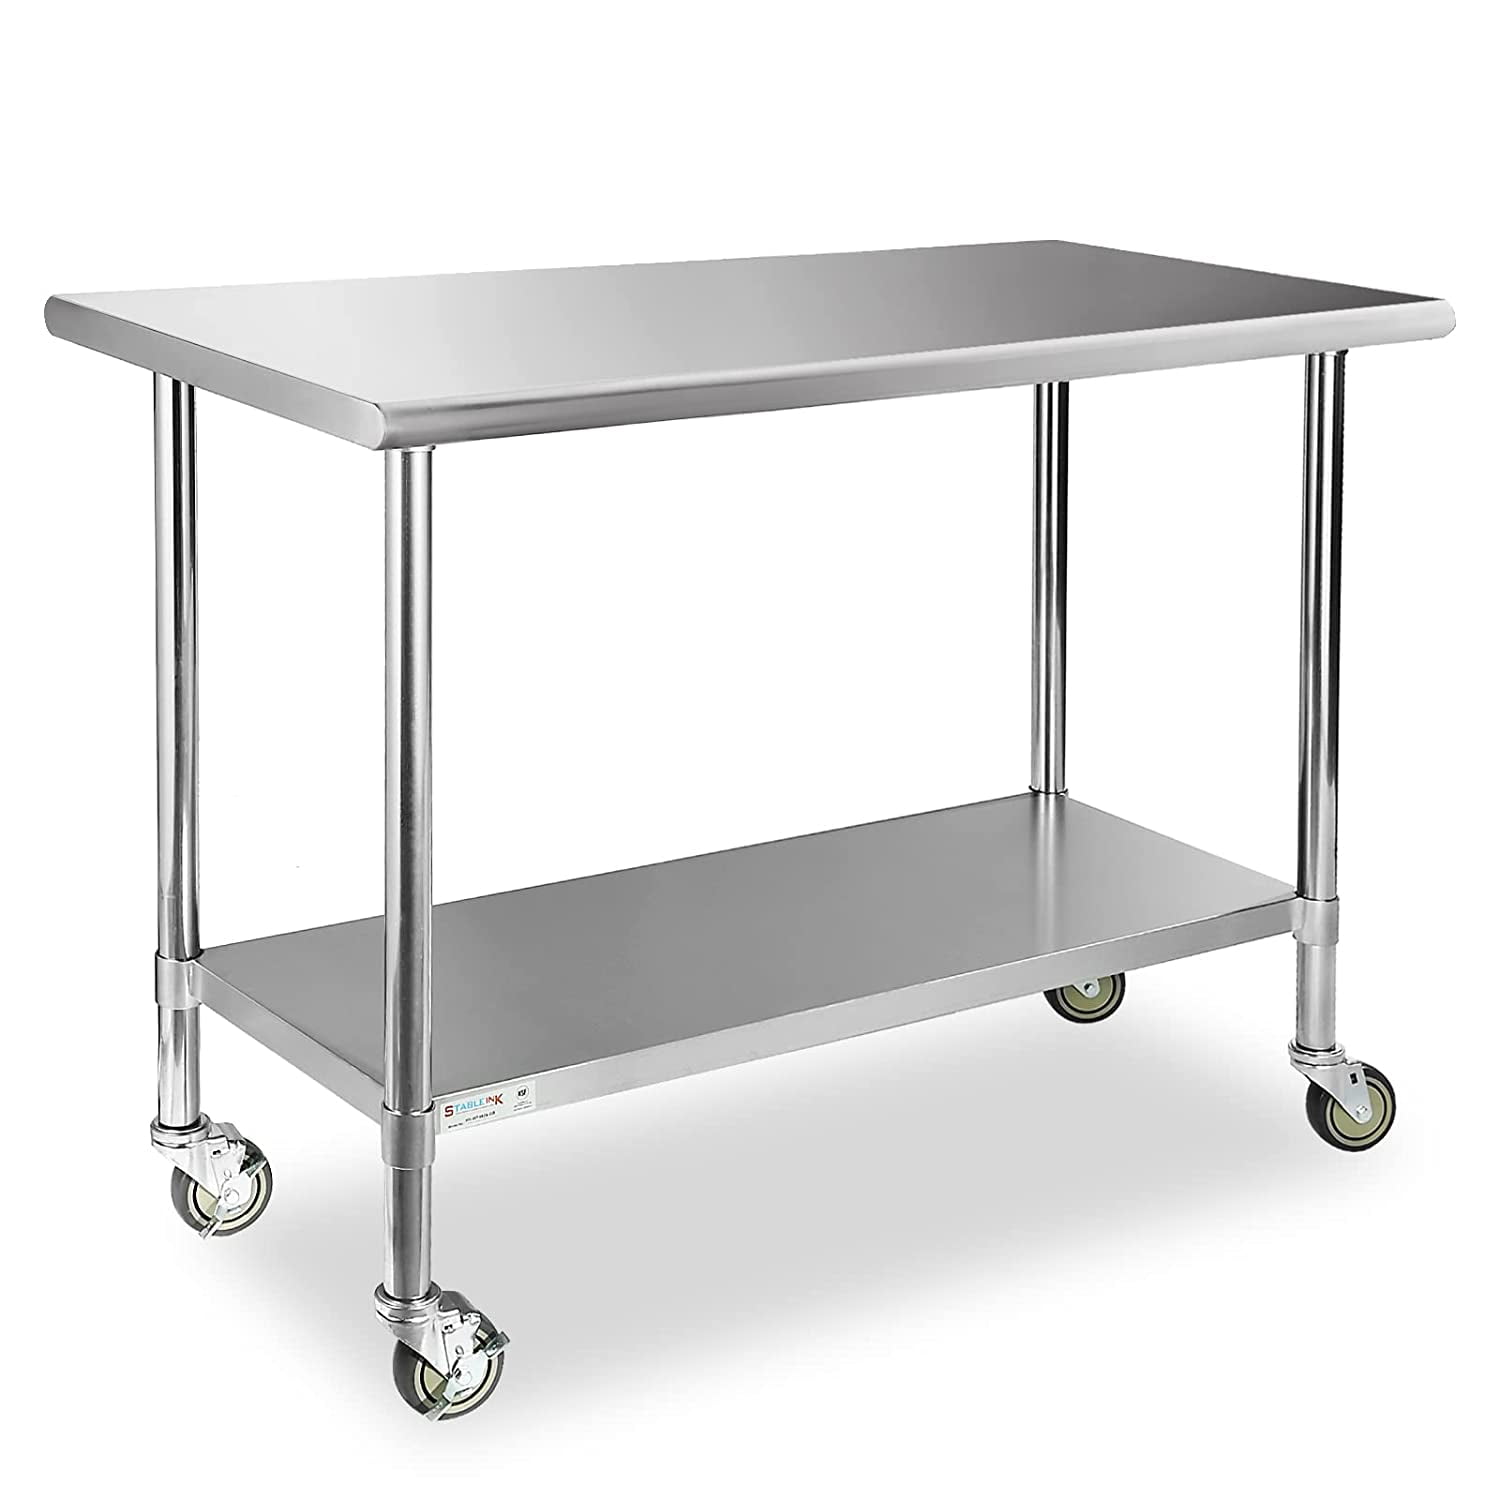 YELROL Stainless Steel Table 24 x 24 Inches NSF Metal Prep & Work Table ...